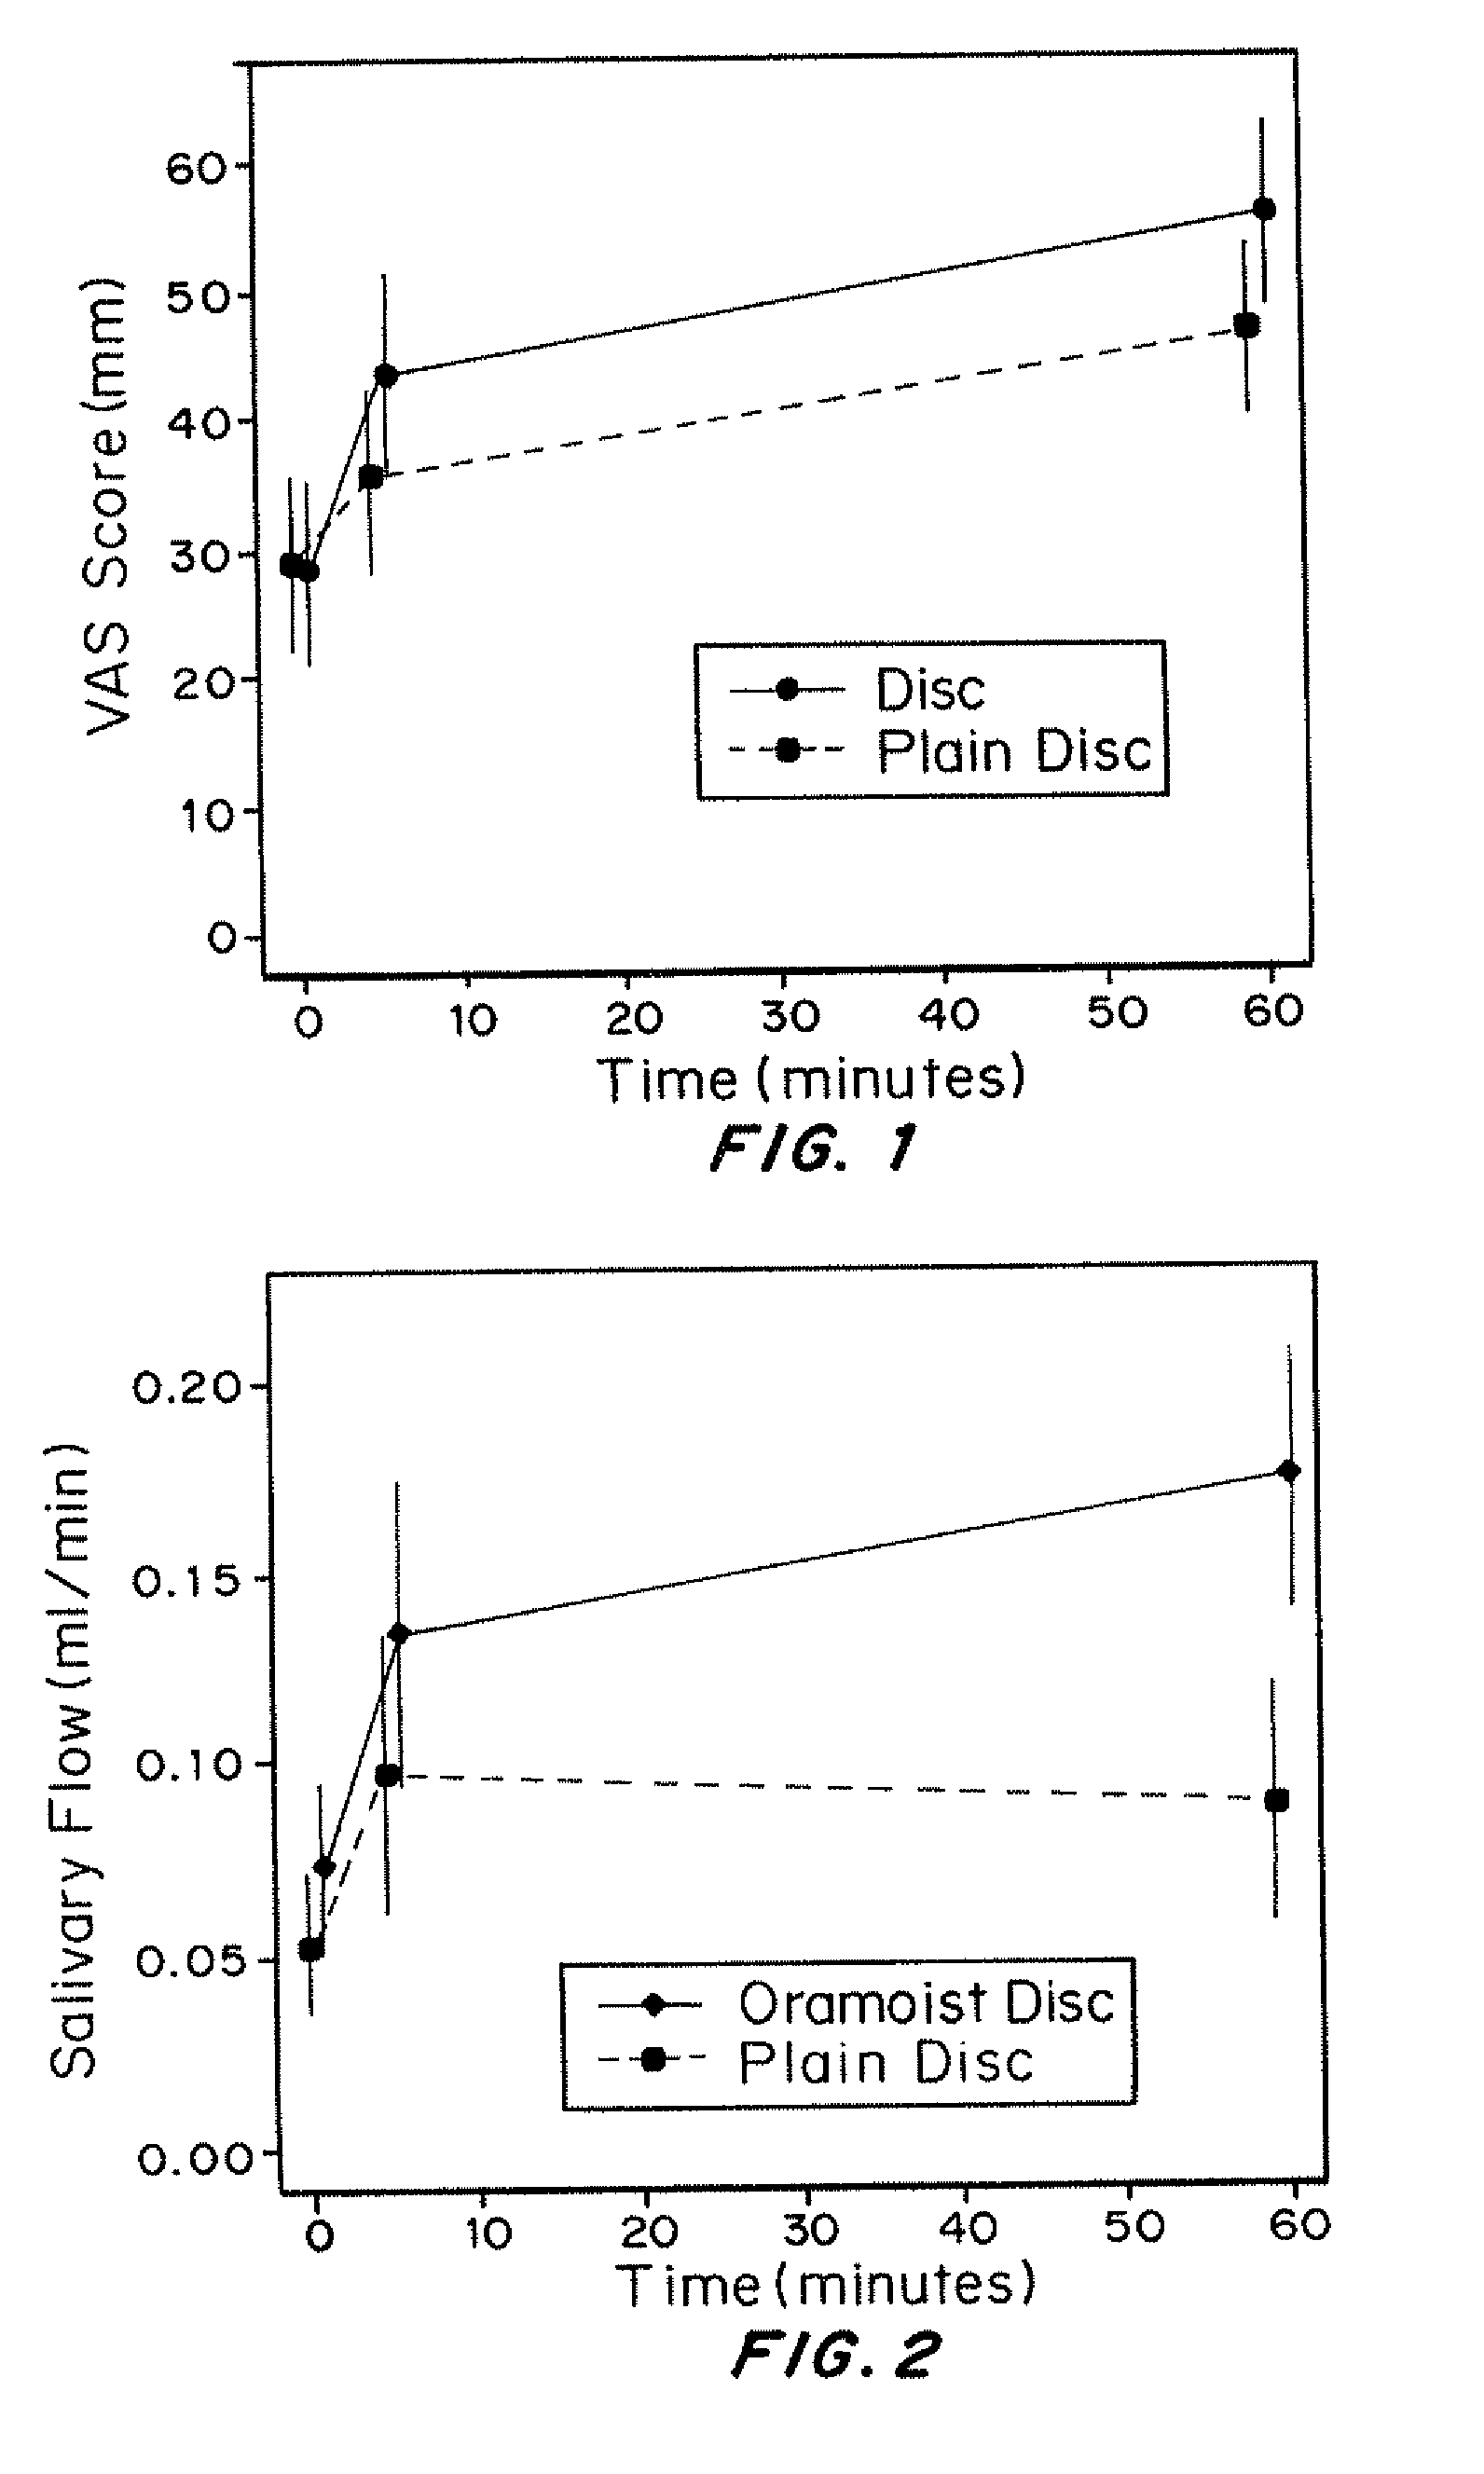 Adhesive compositions for the treatment of xerostomia